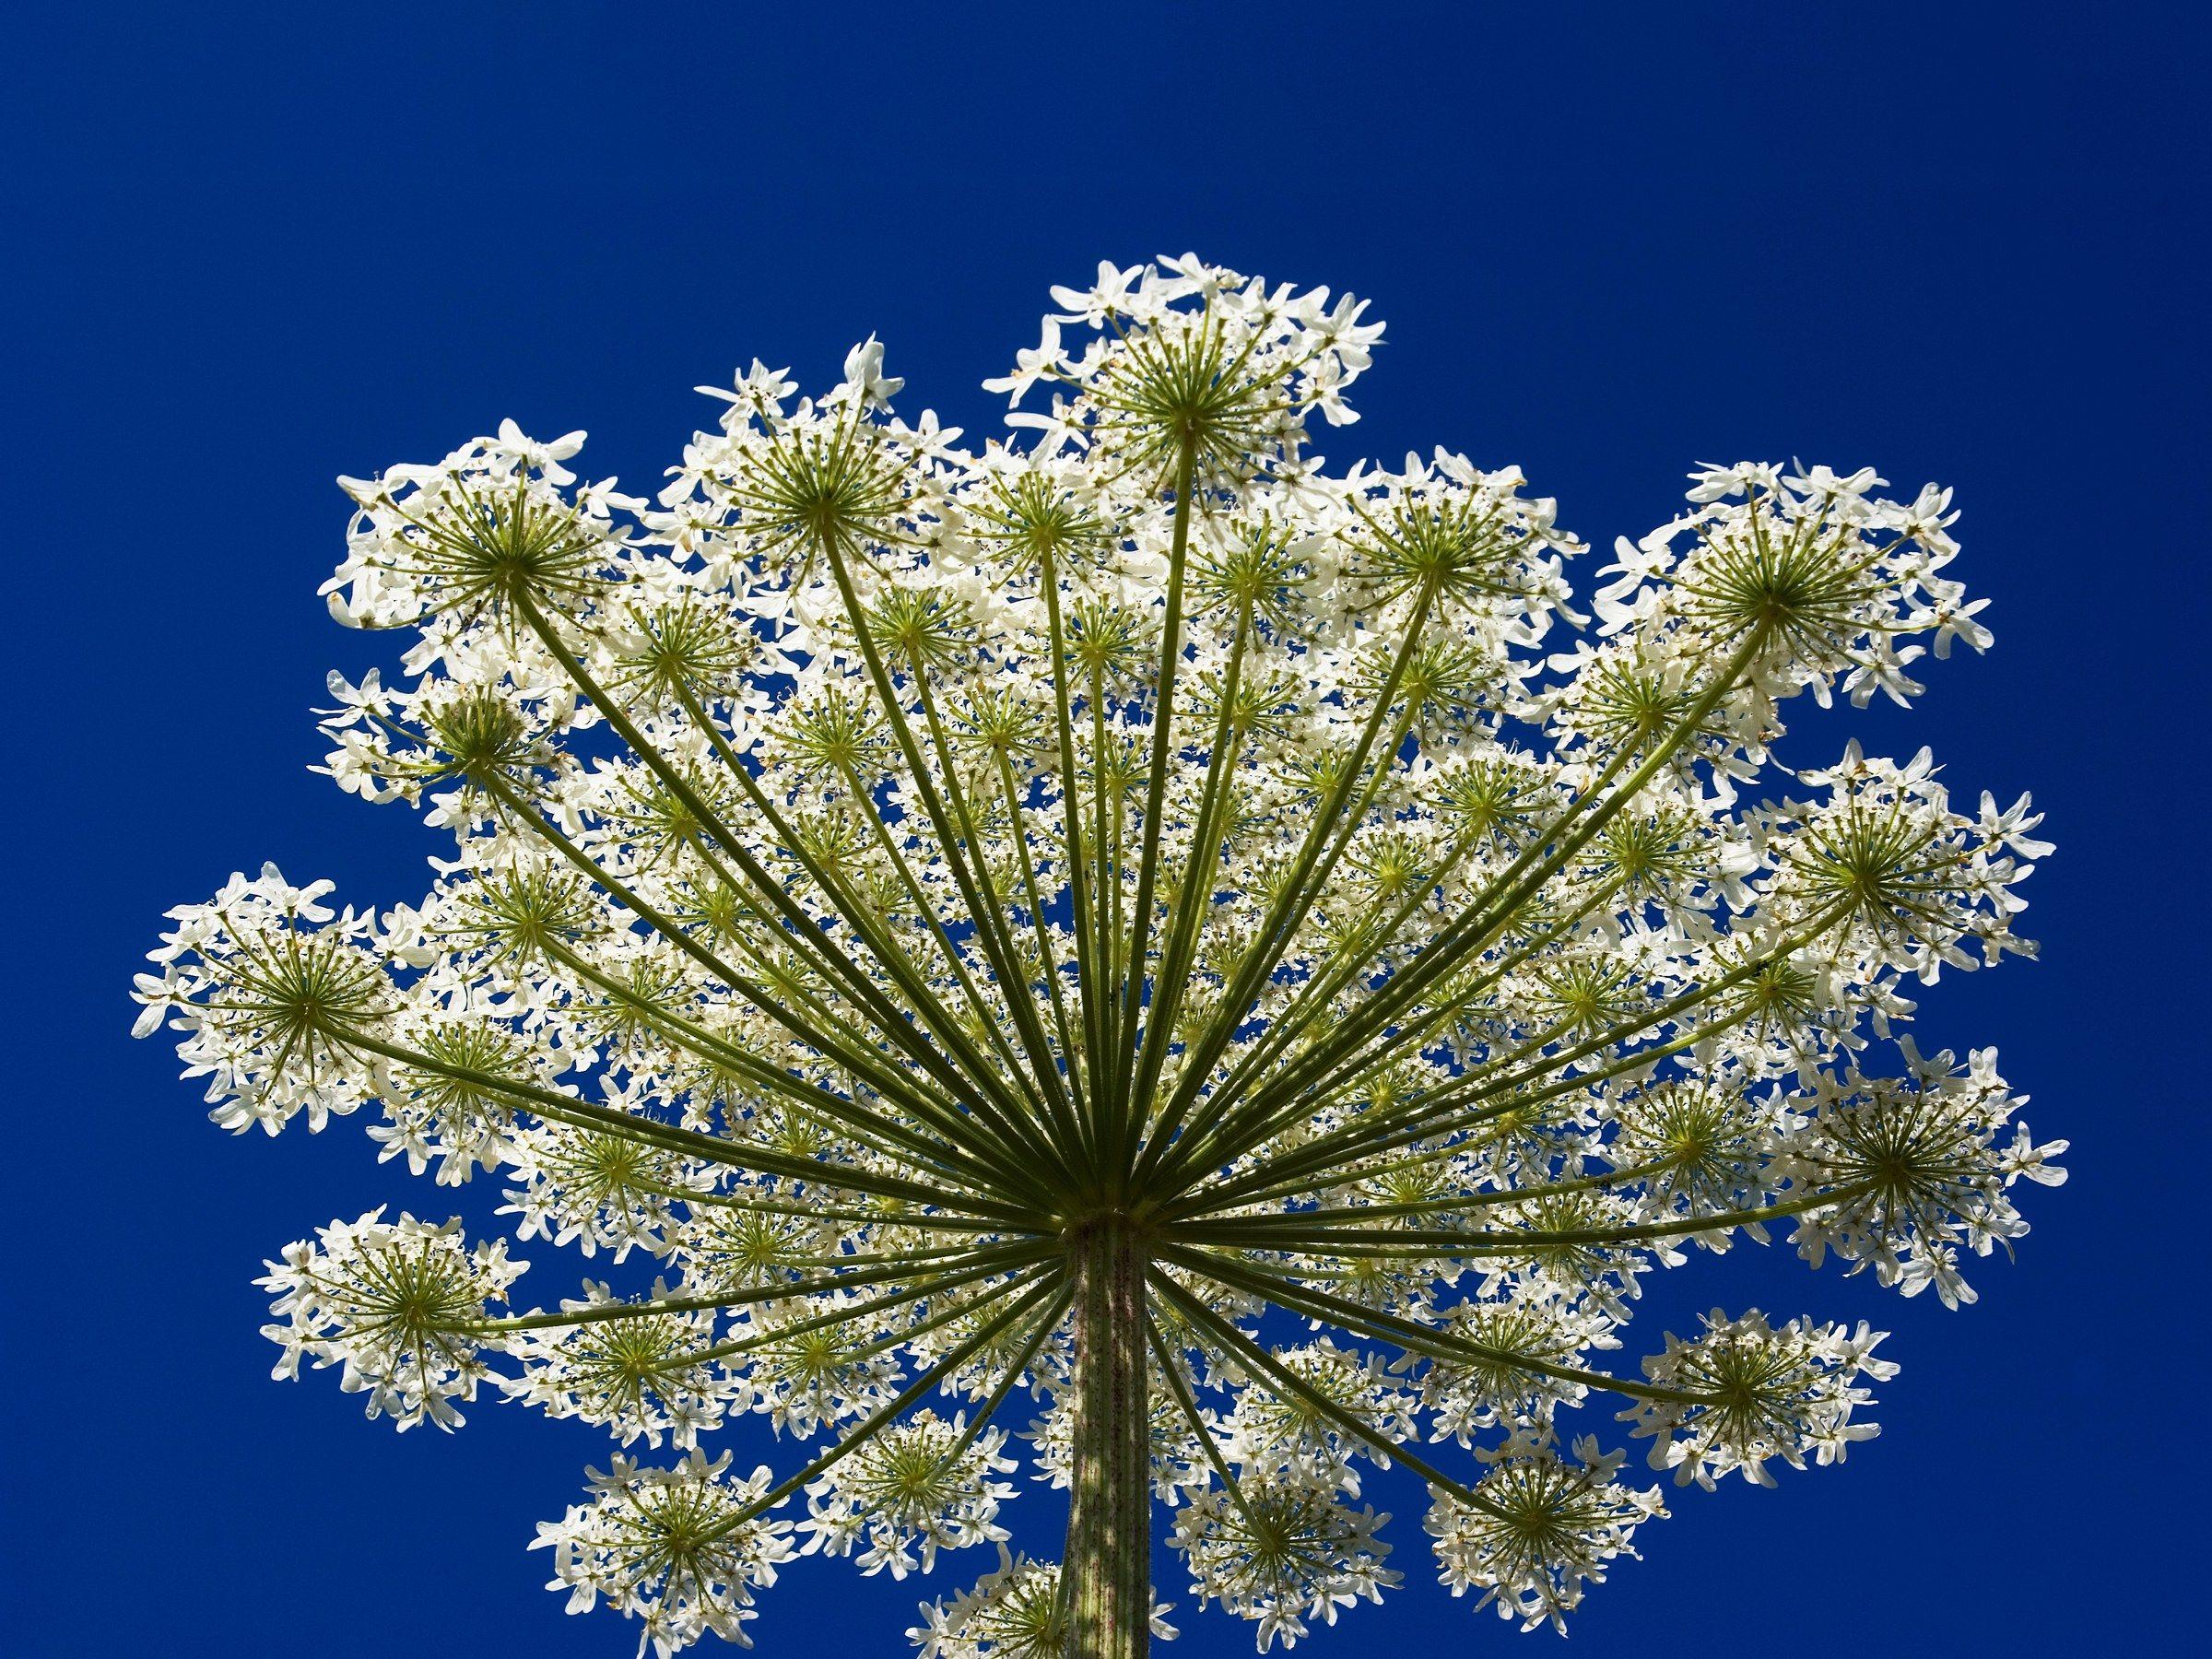 Flowered U Logo - What Is Hogweed? This Invasive Flower Causes Third-Degree Burns | WIRED